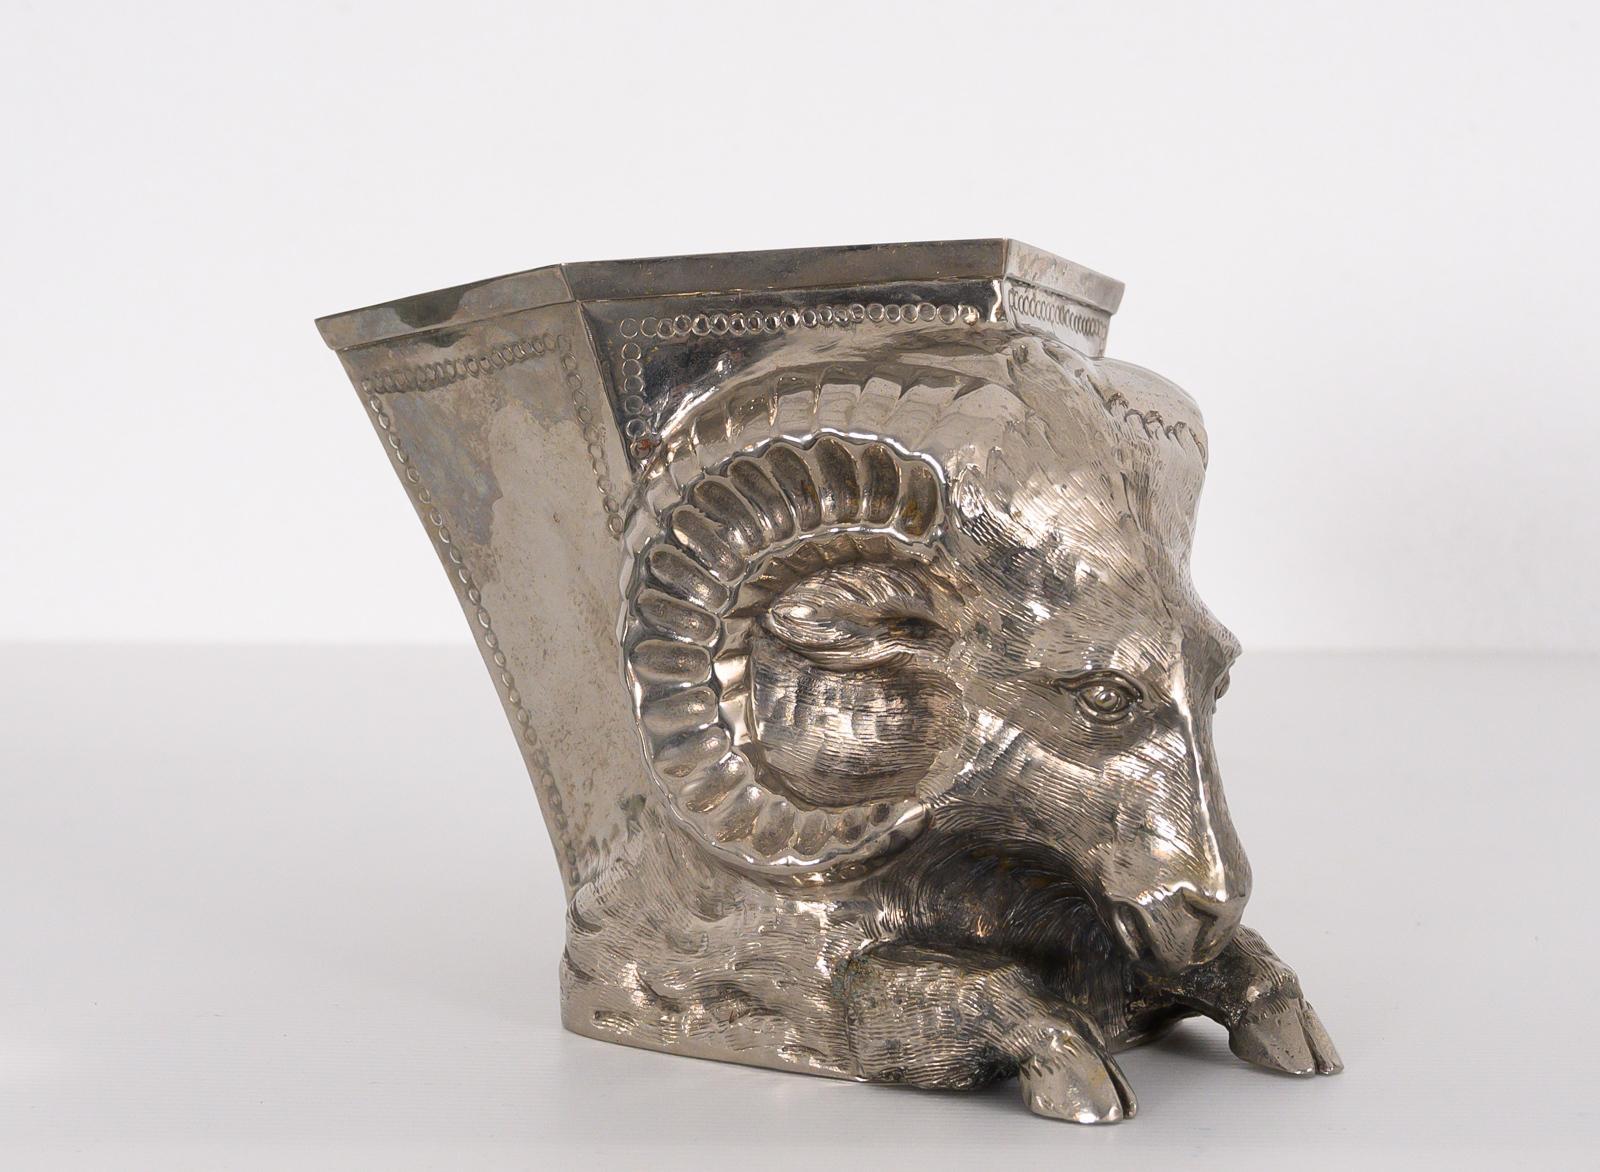 Rare hand worked and chiselled silver plated vase in the form of a Ram. Designed by Gabriella Crespi part of the “Animalia” series possibly for Christian Dior. Signed underneath,
Italy, circa 1970.